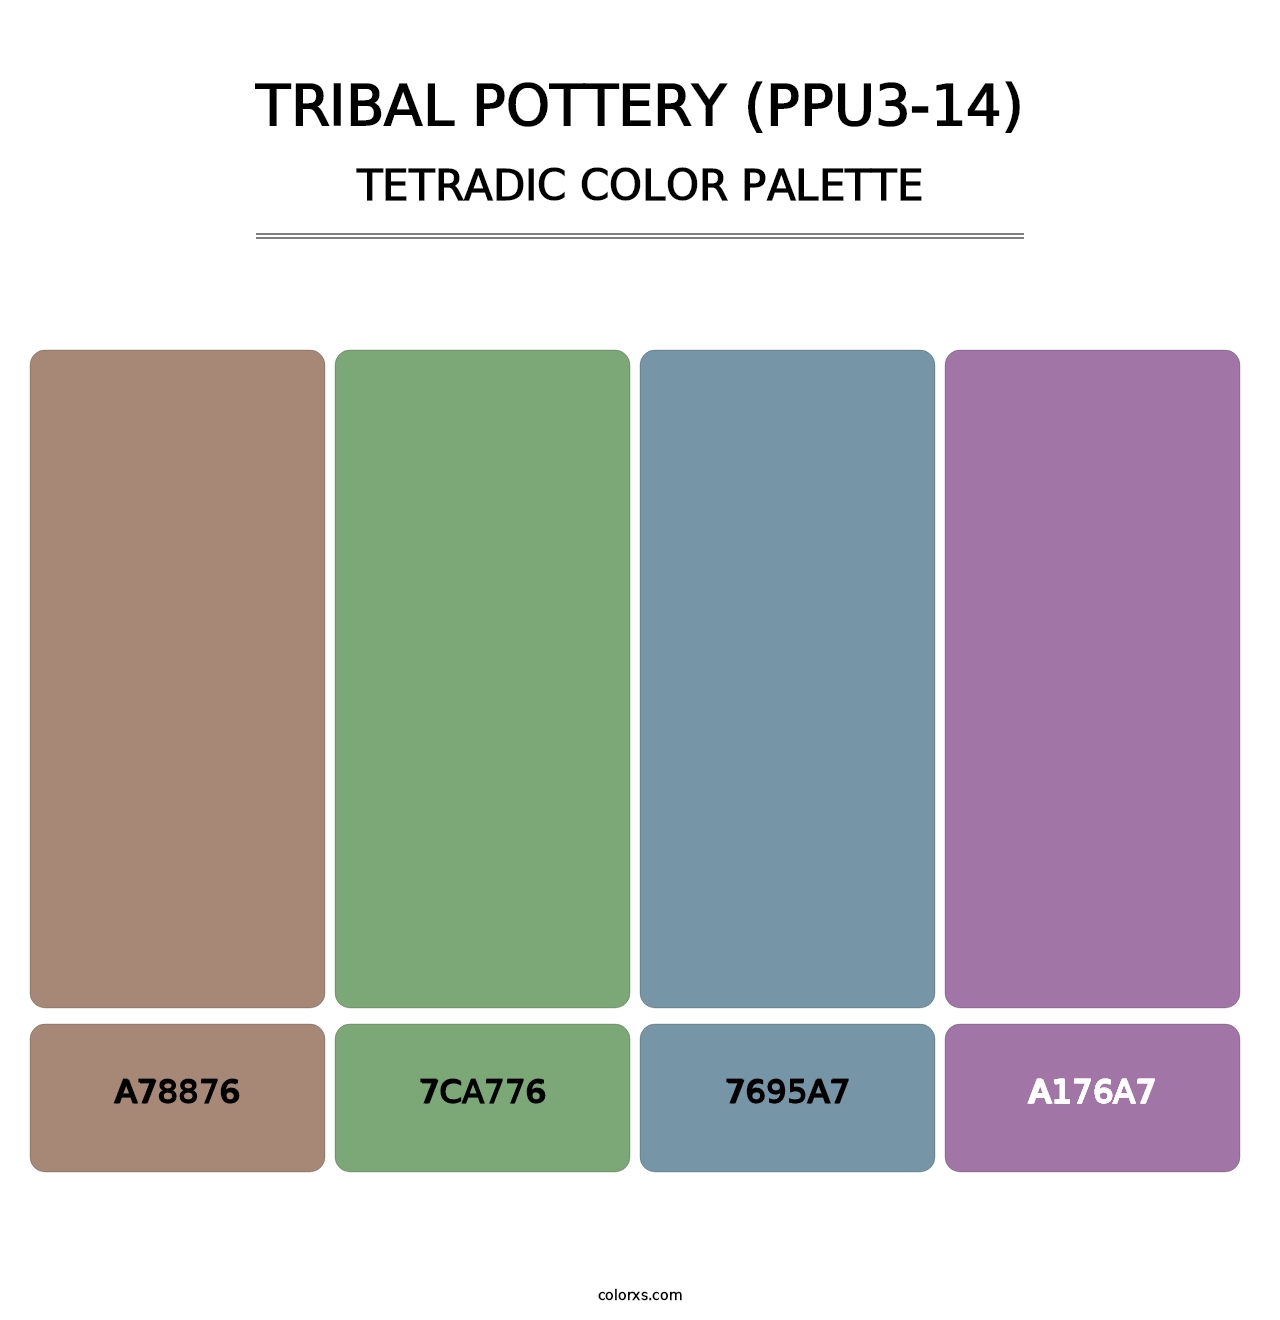 Tribal Pottery (PPU3-14) - Tetradic Color Palette